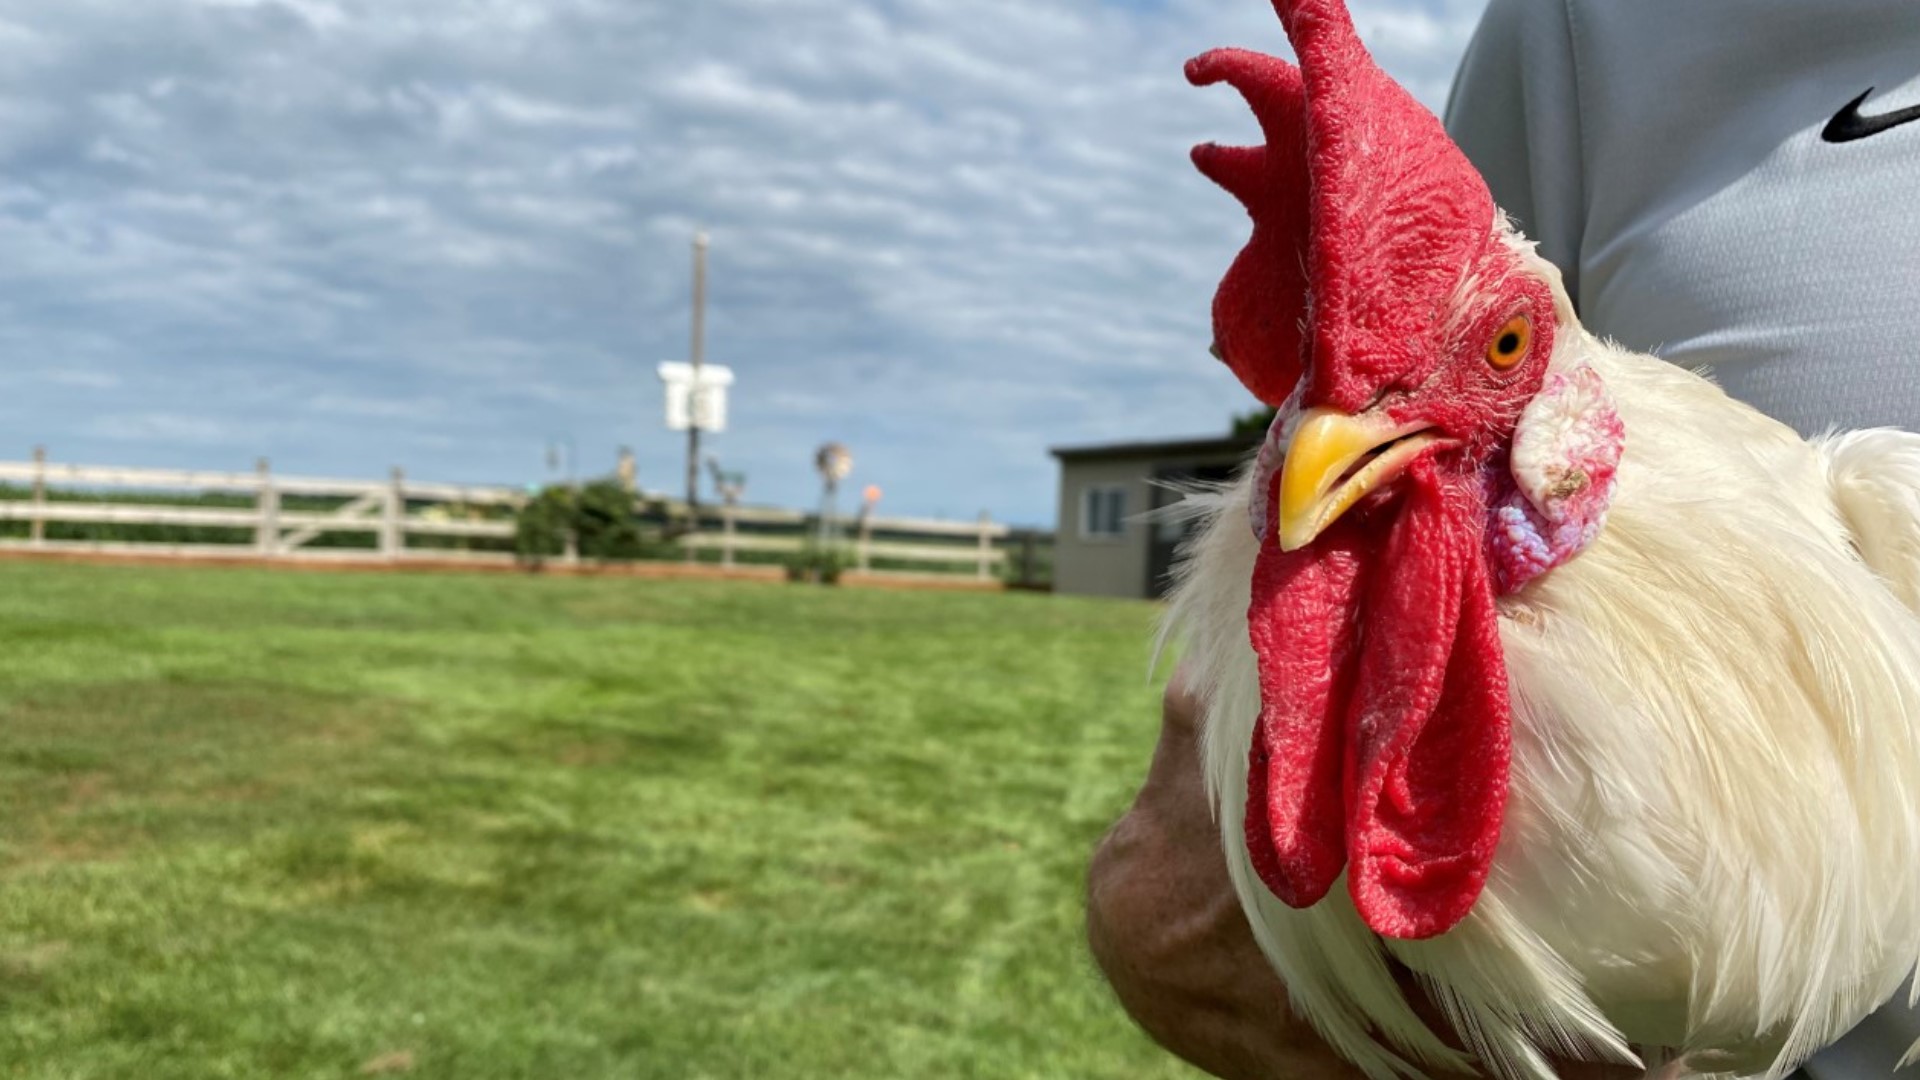 After weeks of tracking his every move on social media, the residents of Plain City gave Harold the rooster a new place to call home.